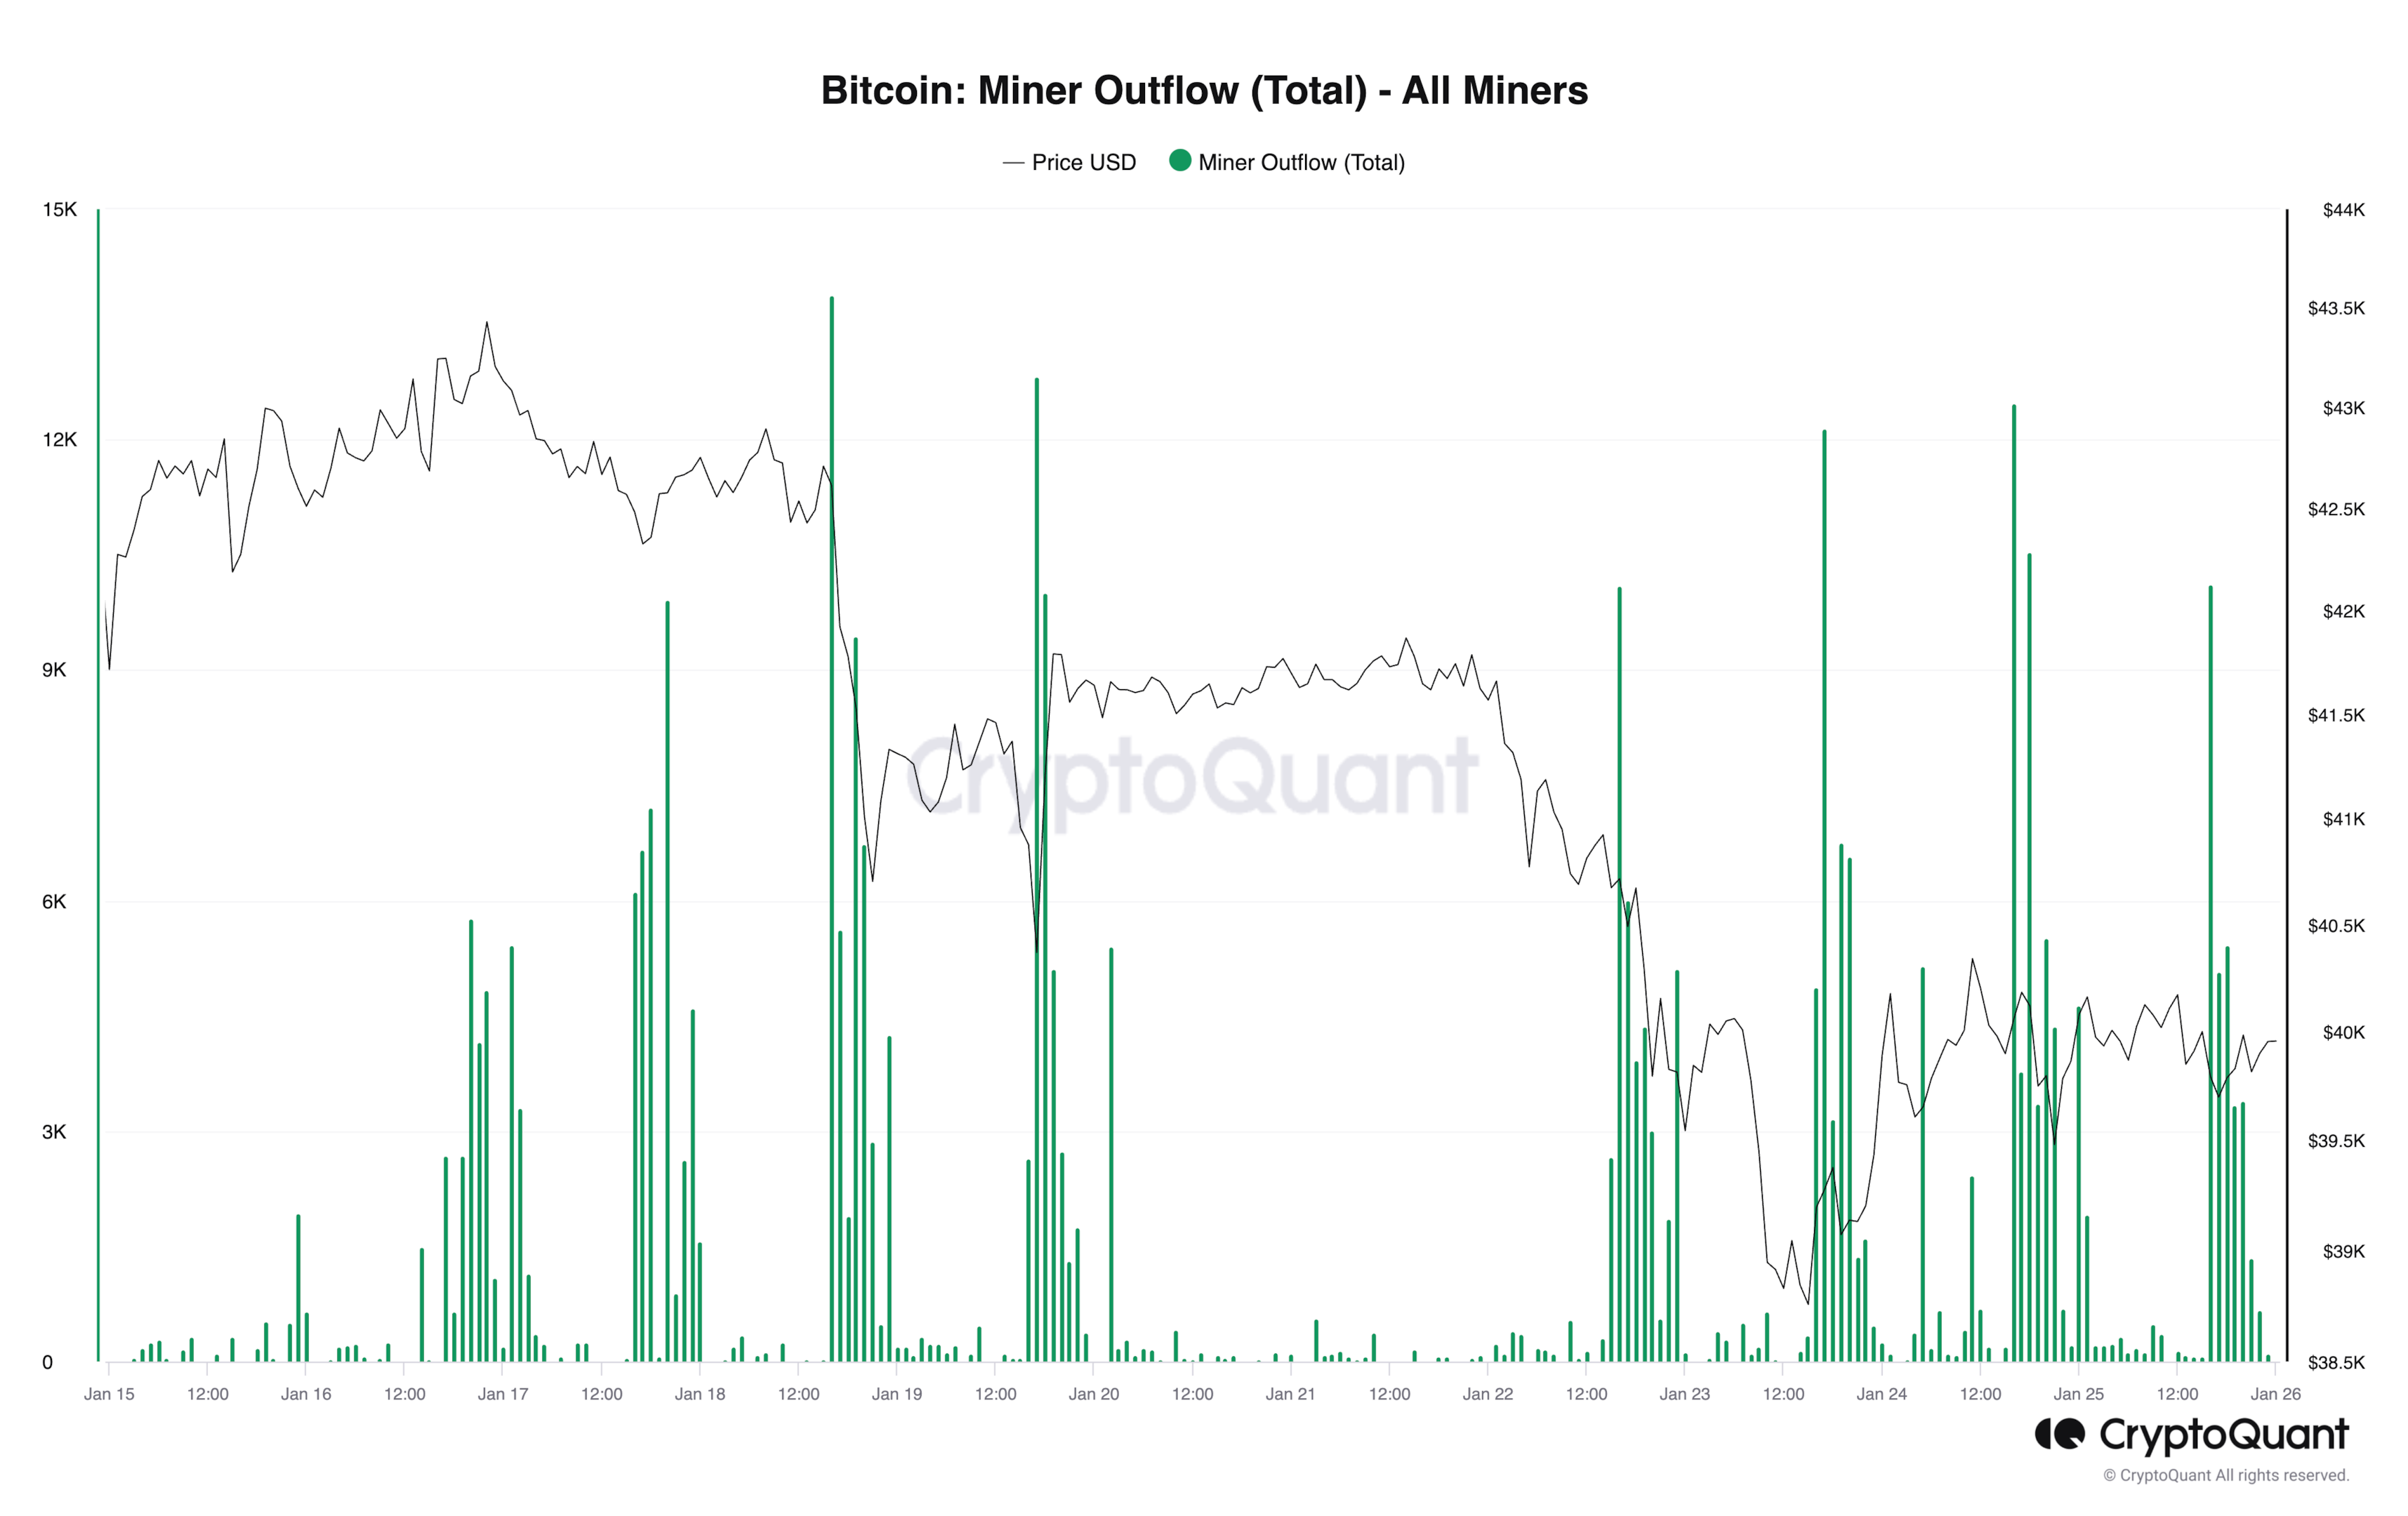 Bitcoin Miner Outflows Hit Six-Year Highs Ahead of Halving | Video | CoinDesk